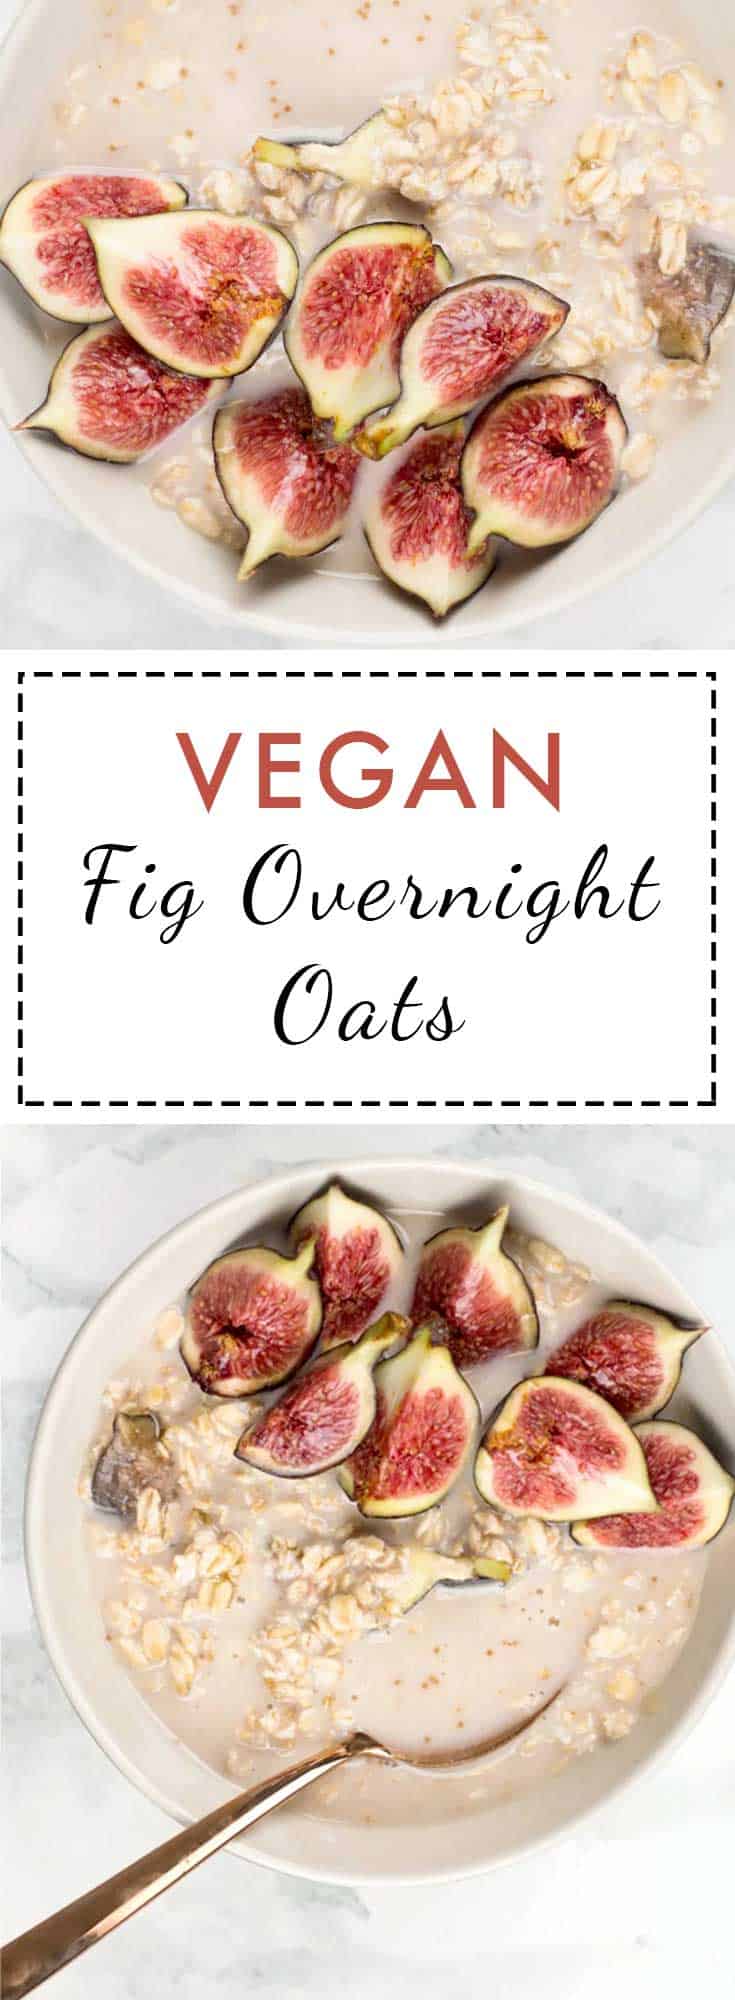 Healthy vegan fig overnight oats recipes - easy to make breakfast that only takes 5min to make and is sugar free, gluten free and vegan